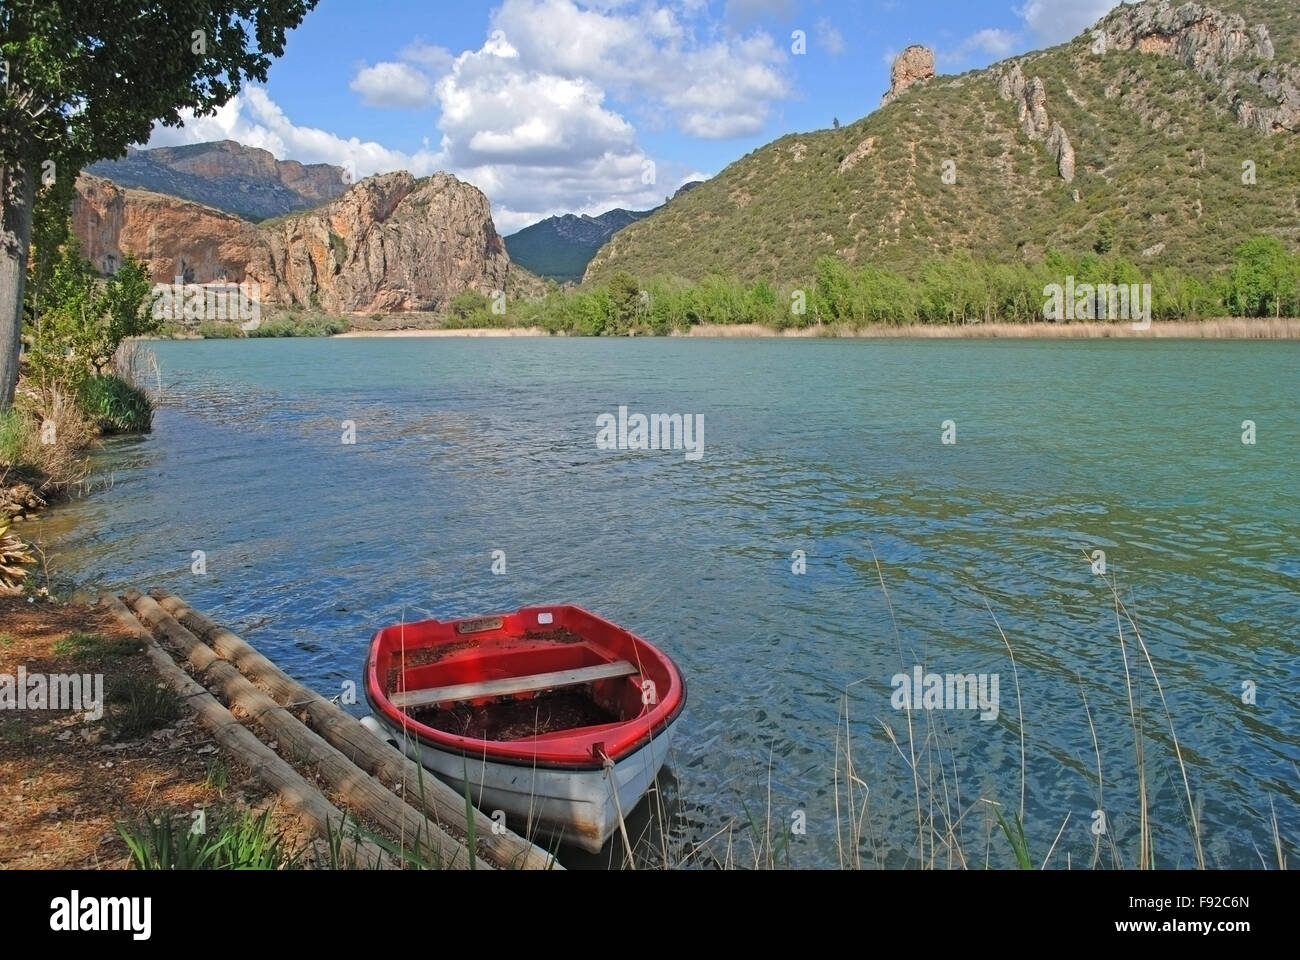 The Sant Llorenç de Montgai reservoir in Catalonia, Spain, is home to several species of water birds. Stock Photo